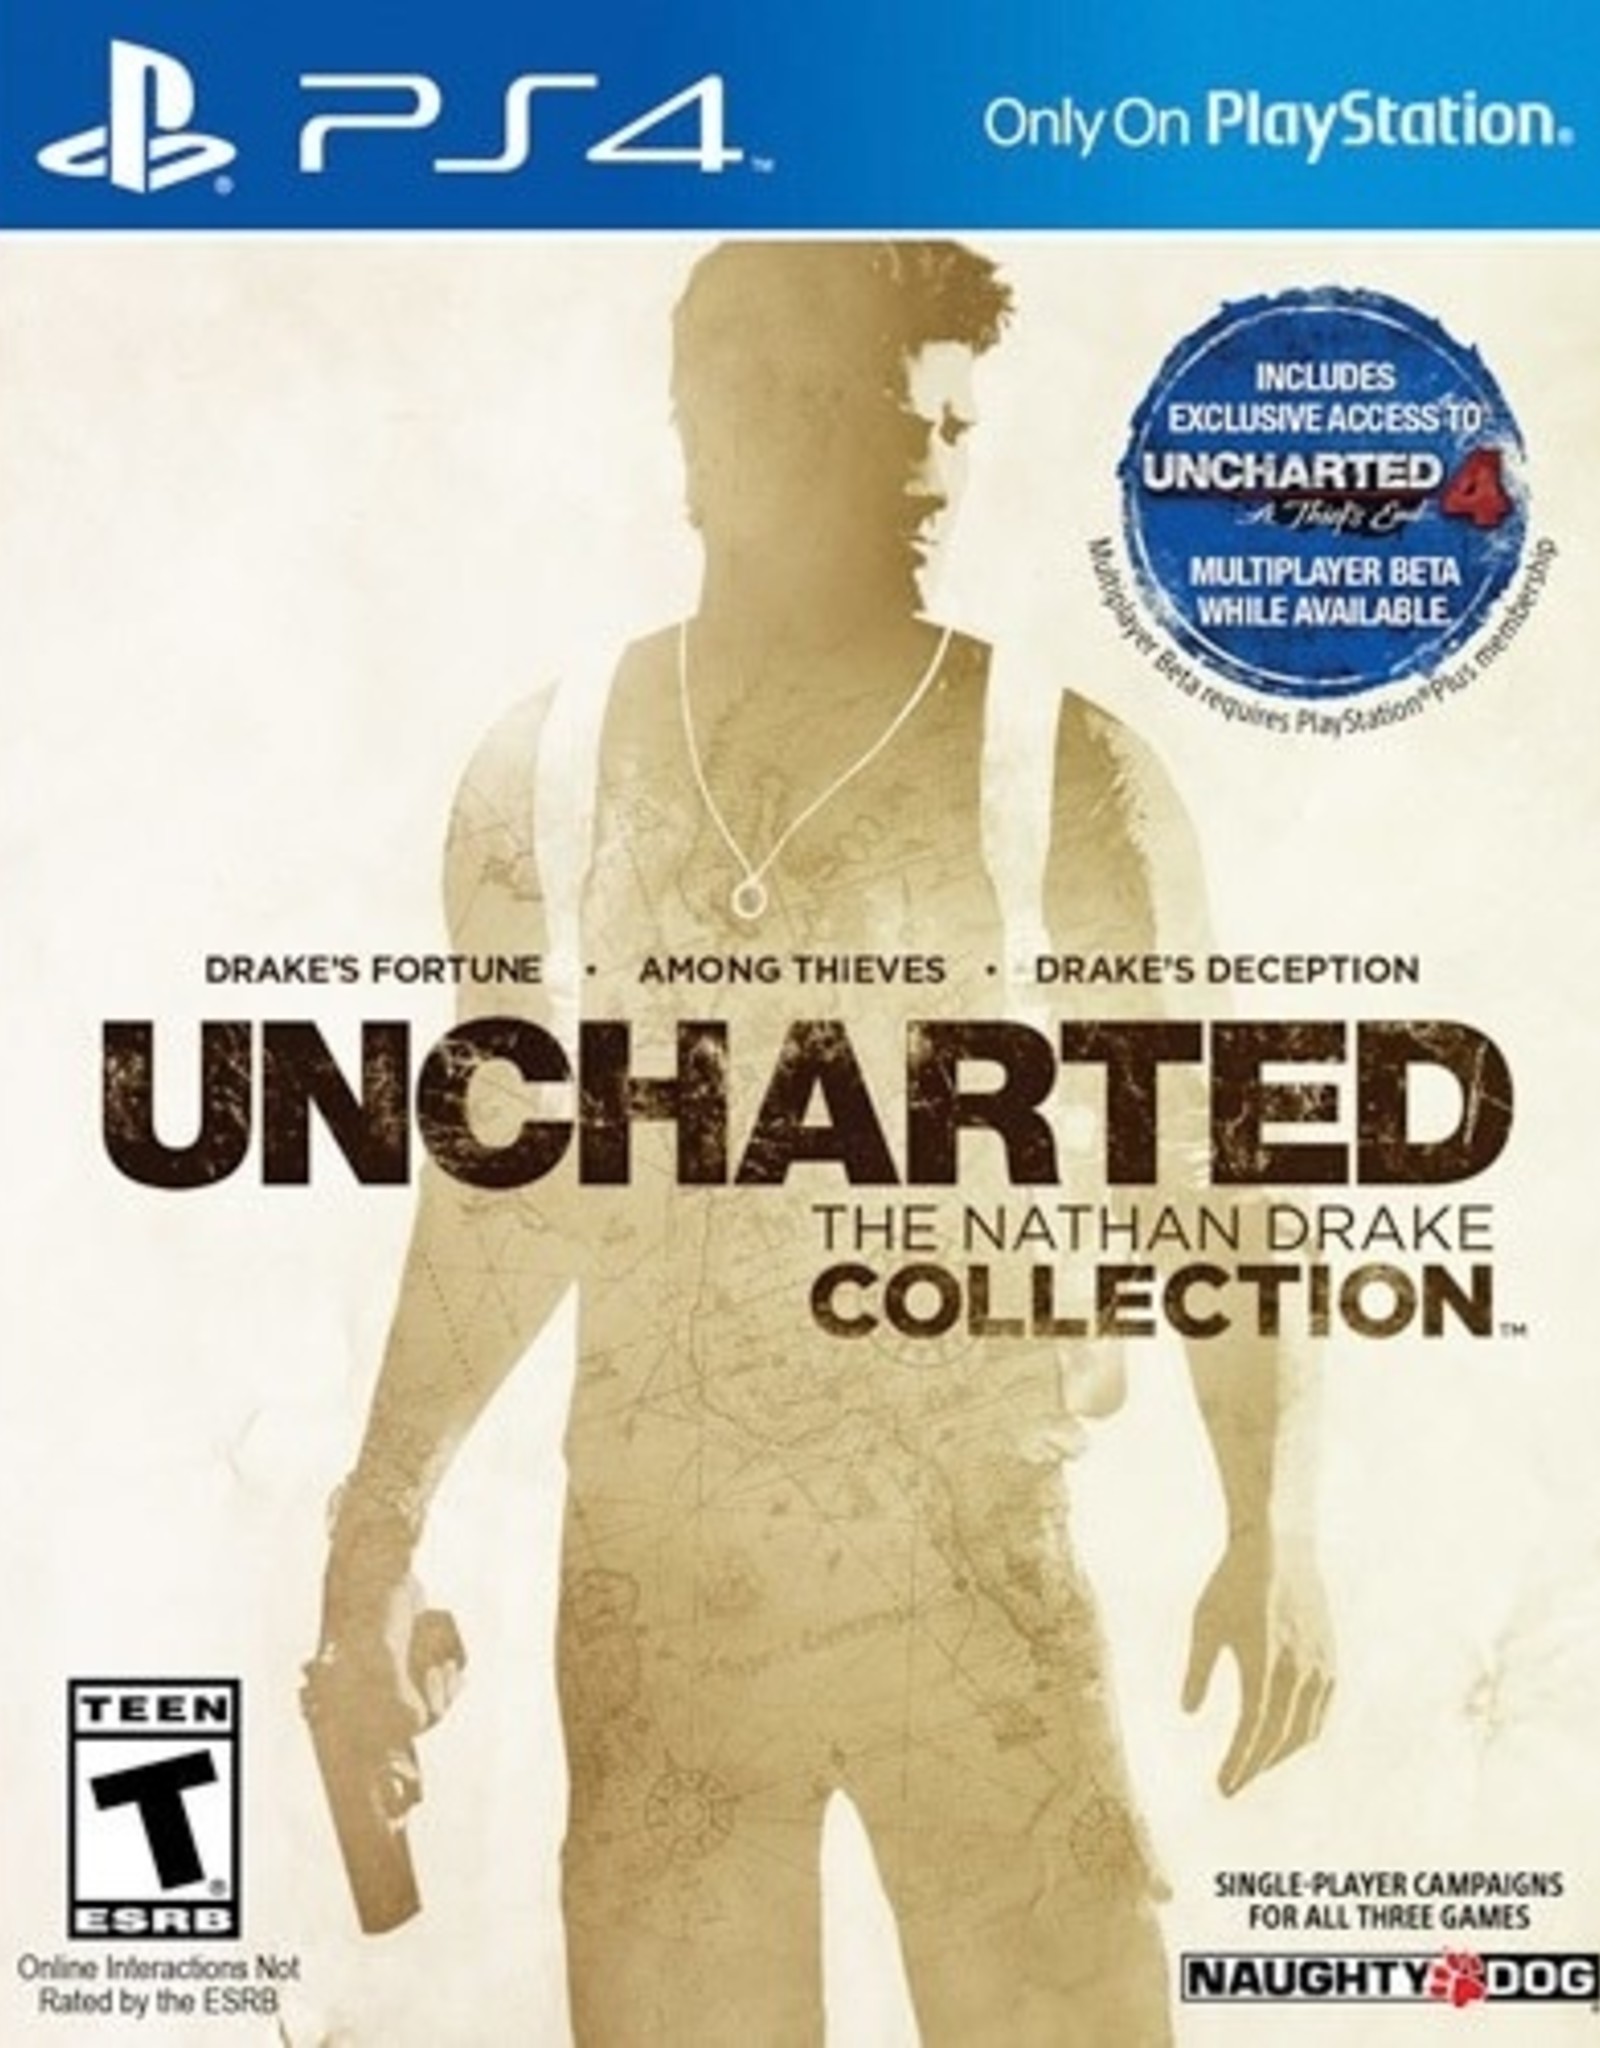 uncharted collection digital